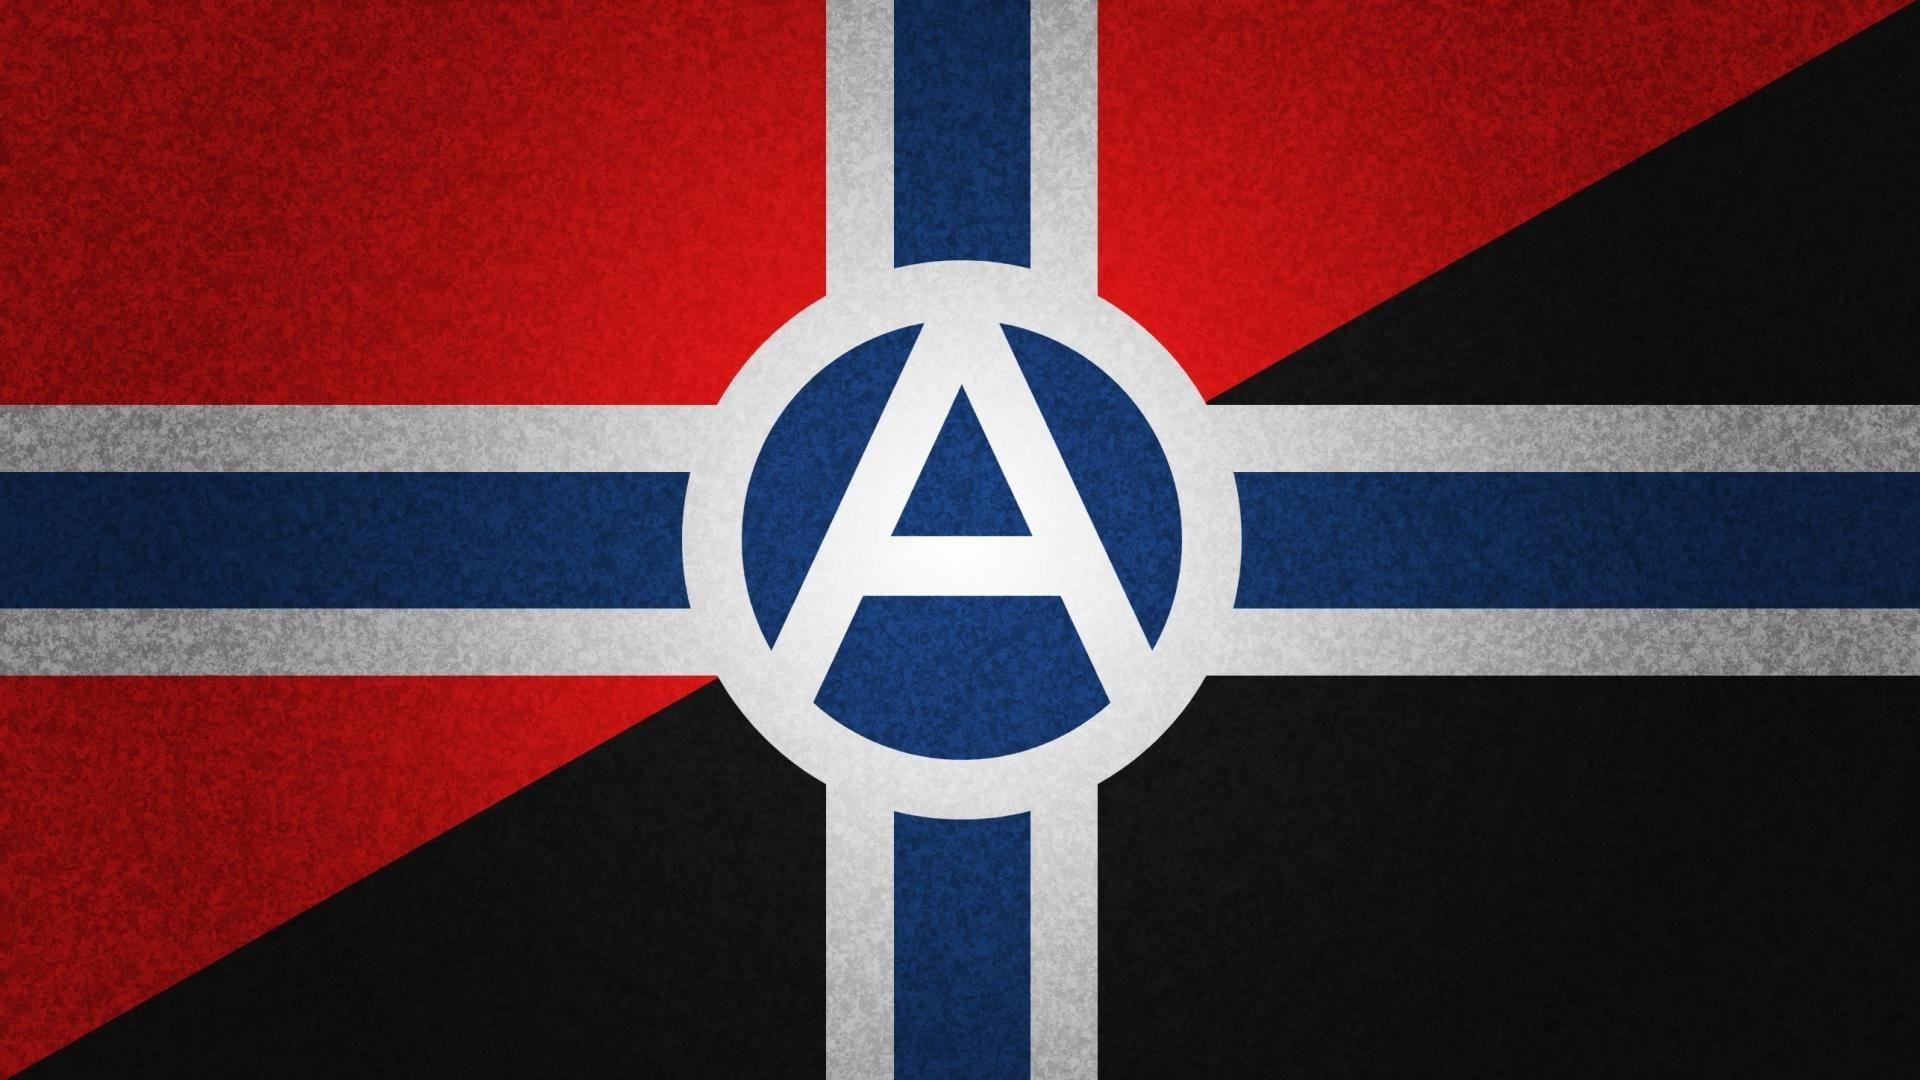 Anarchy Flag Wallpapers - Wallpaper Cave